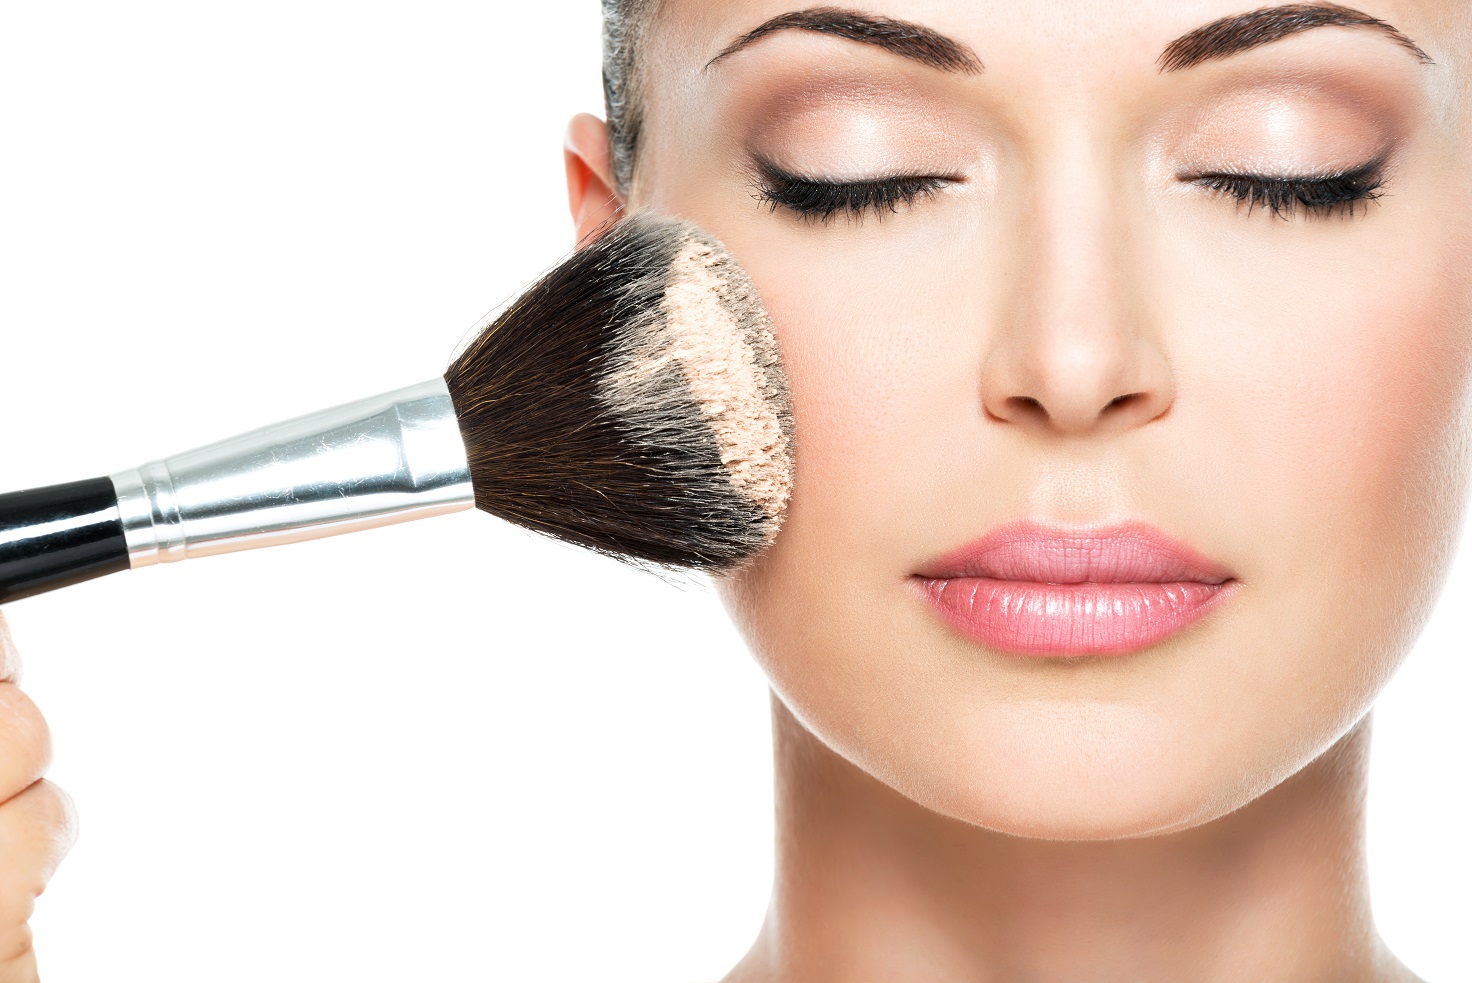 Top 5 Makeup Applications that are sure to give you an all new look